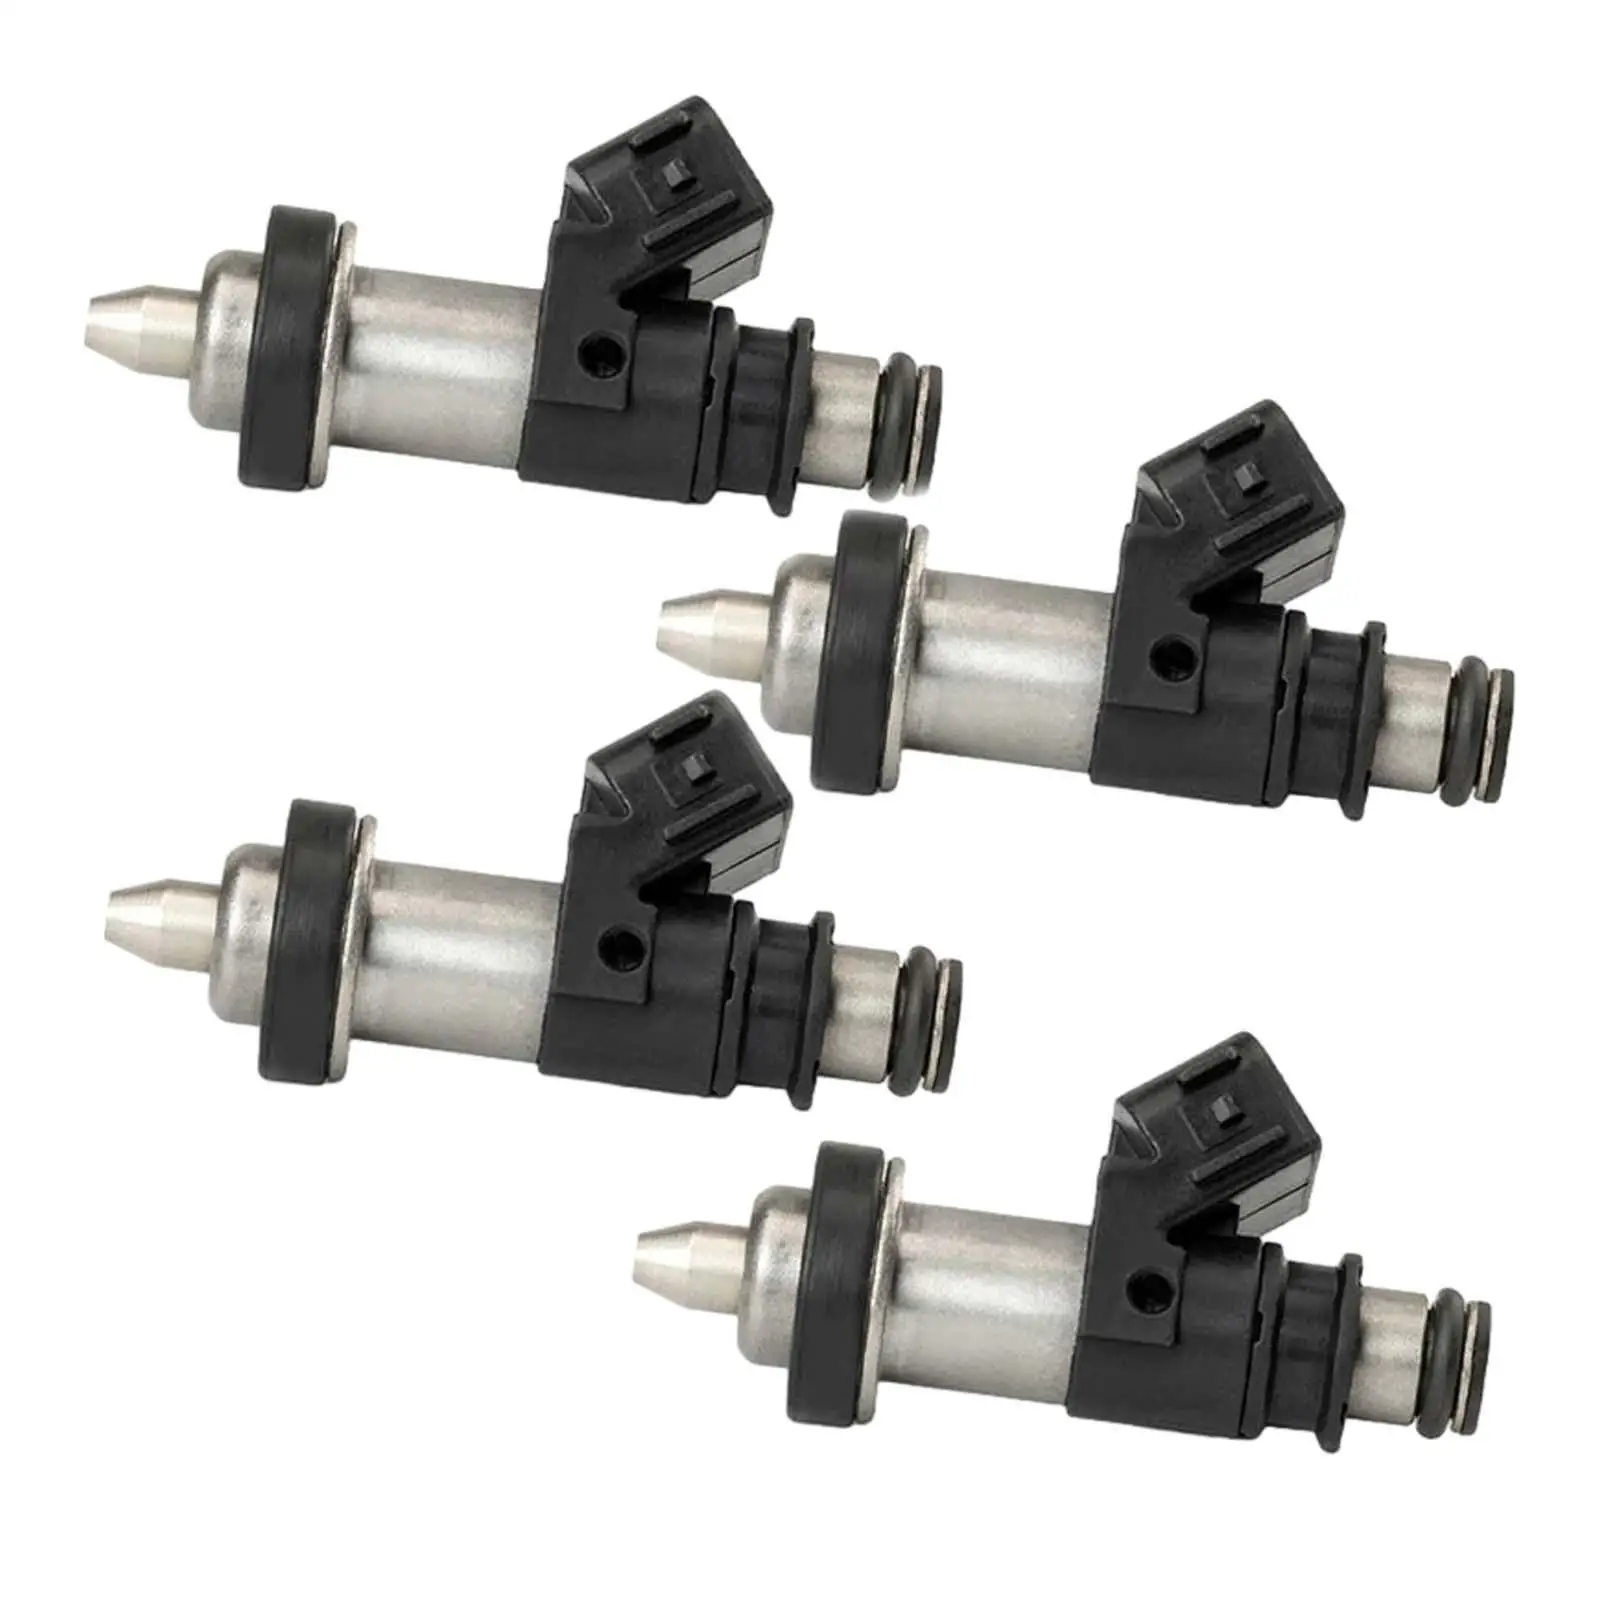 

4 Pieces Fuel Injectors Spare Parts Easy Installation Direct Replaces Accessories 15710-24F00 06164-pca-000 for Suzuki Gsxr